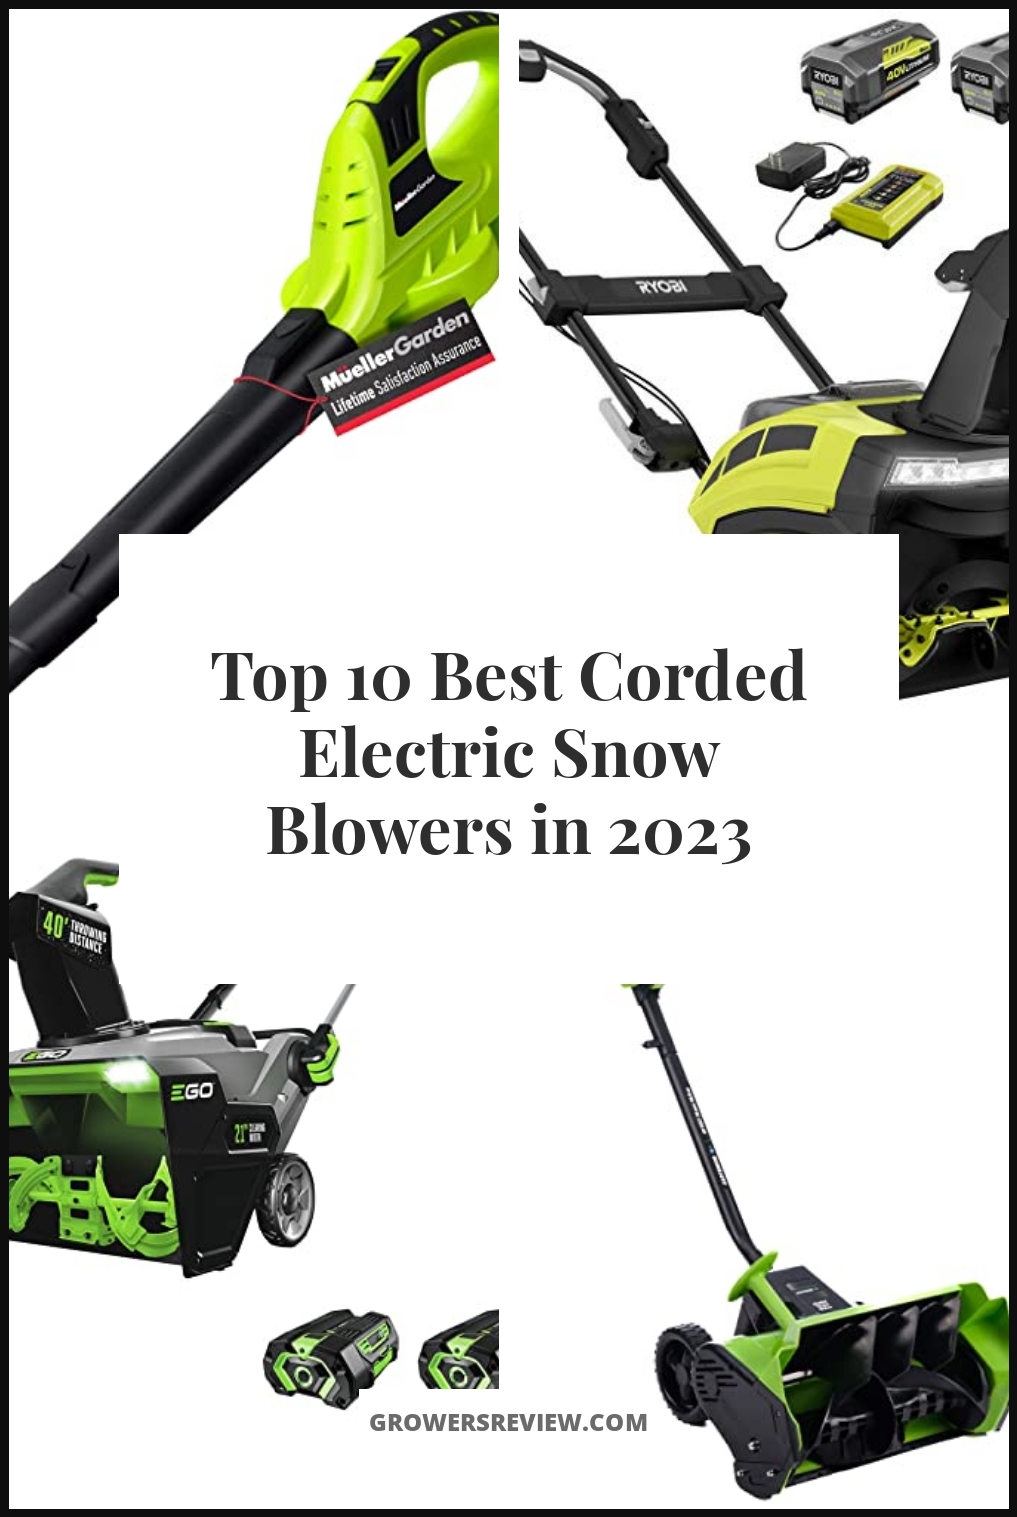 Best Corded Electric Snow Blowers - Buying Guide